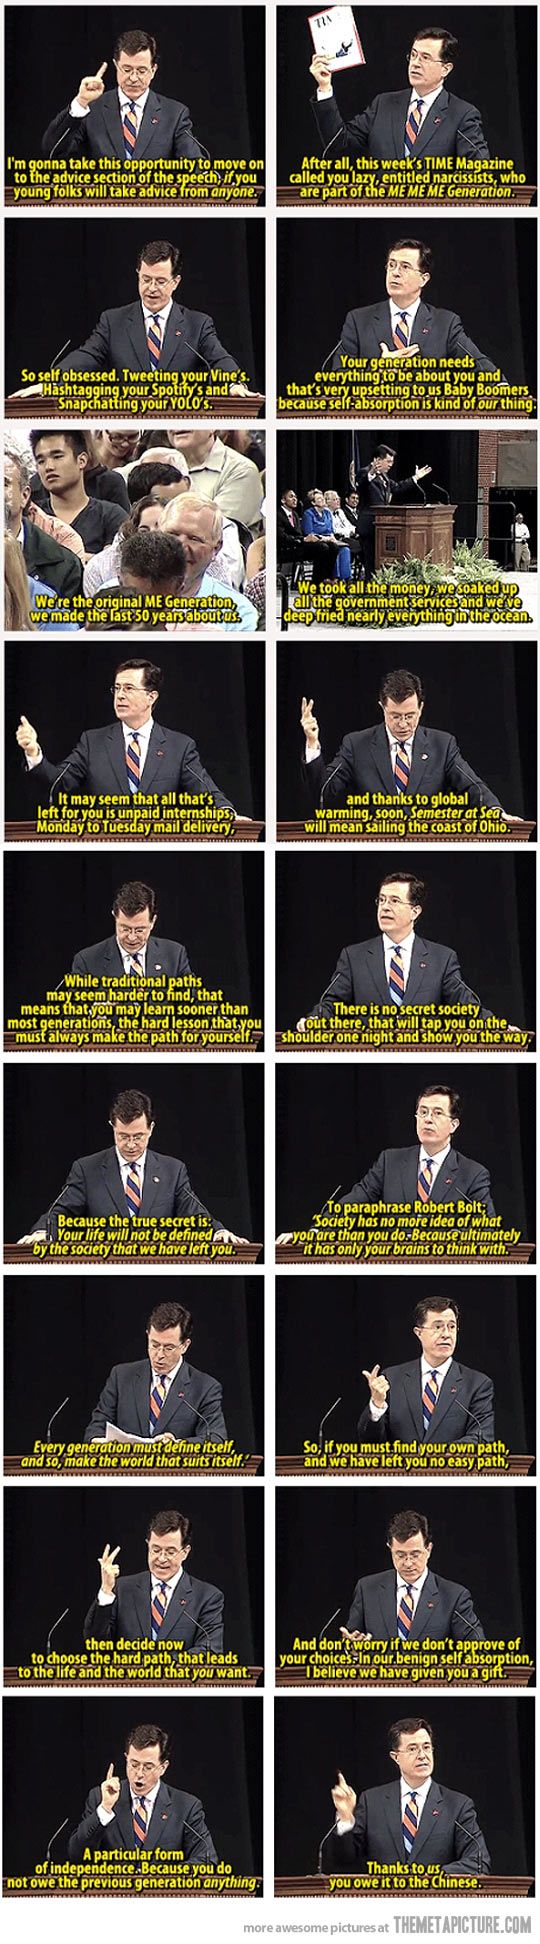 Steven Colbert is awesome